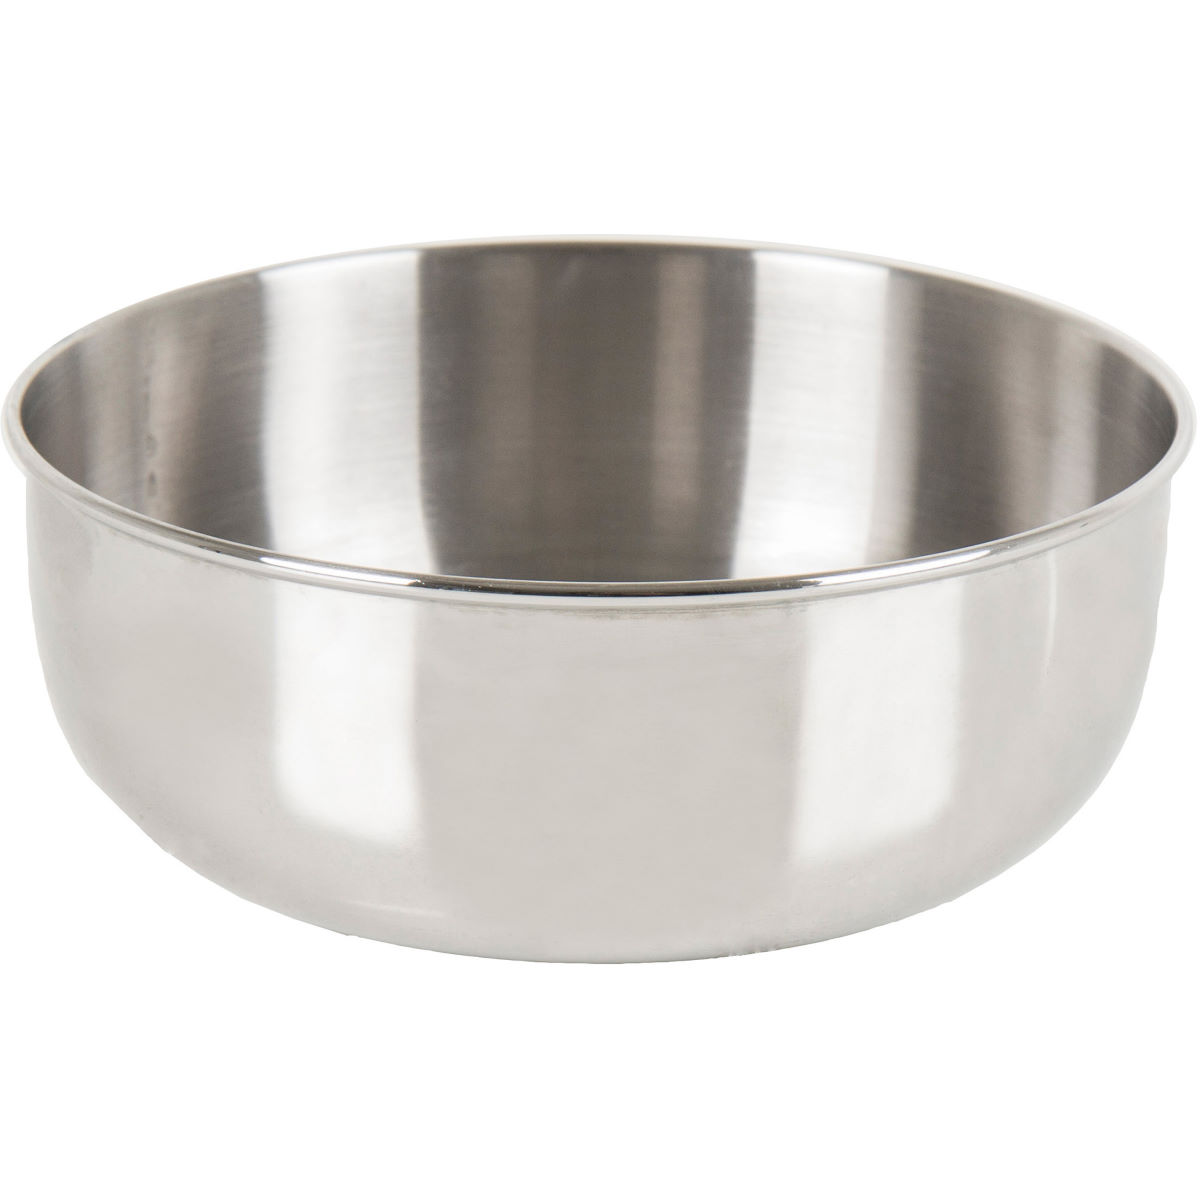 Lifeventure Stainless Steel Camping Bowl - Vajilla